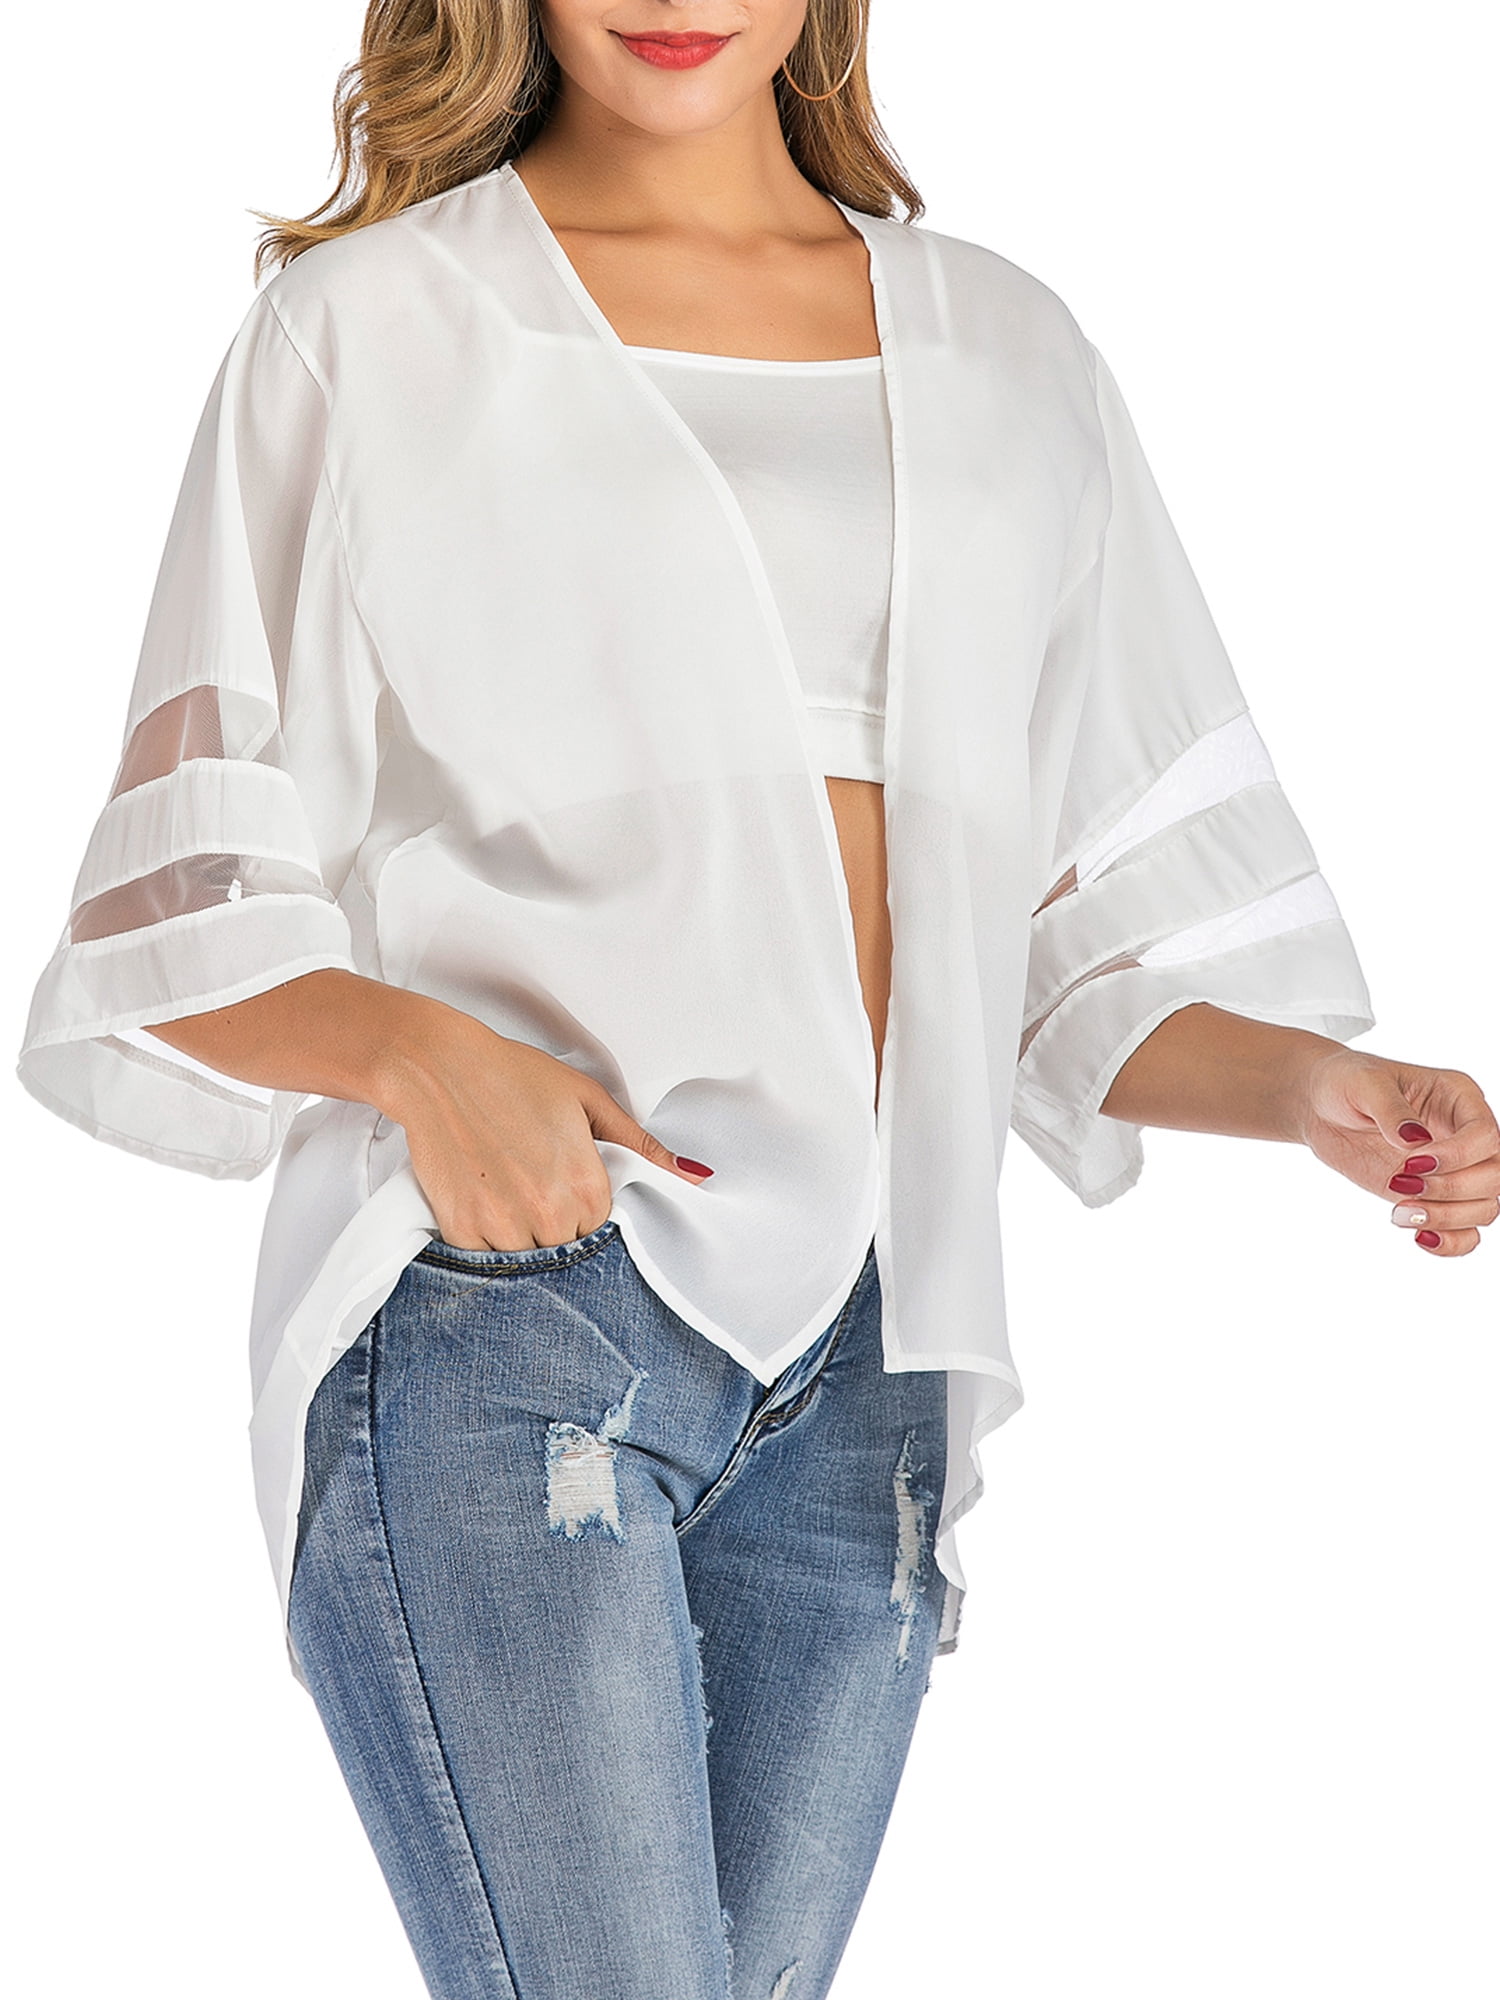 Hollywood Star Fashion Womens Plus Size Semi Sheer Long Roll Sleeves Blouse